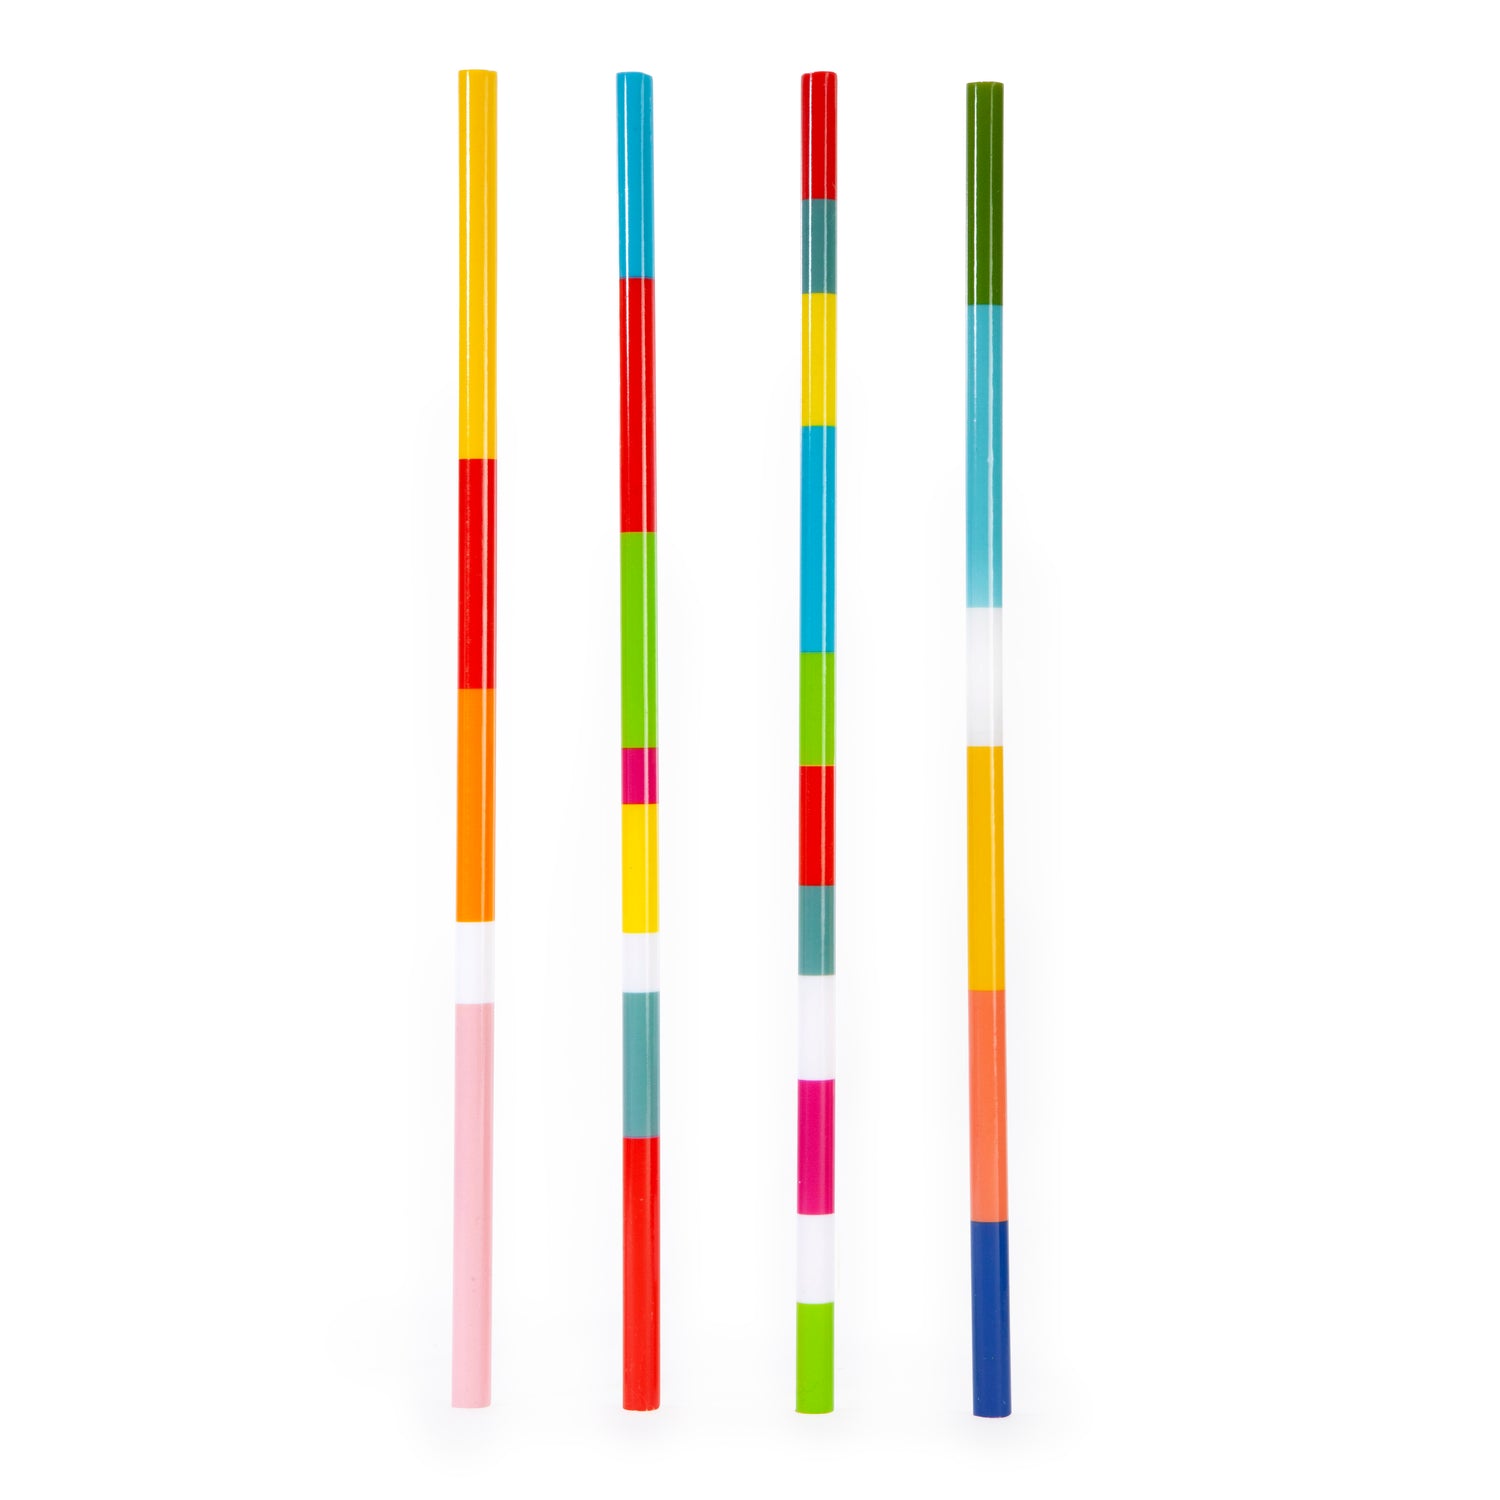 24-9 goodcook Reusable Plastic Straws Multi Colored, with Cleaning Brush